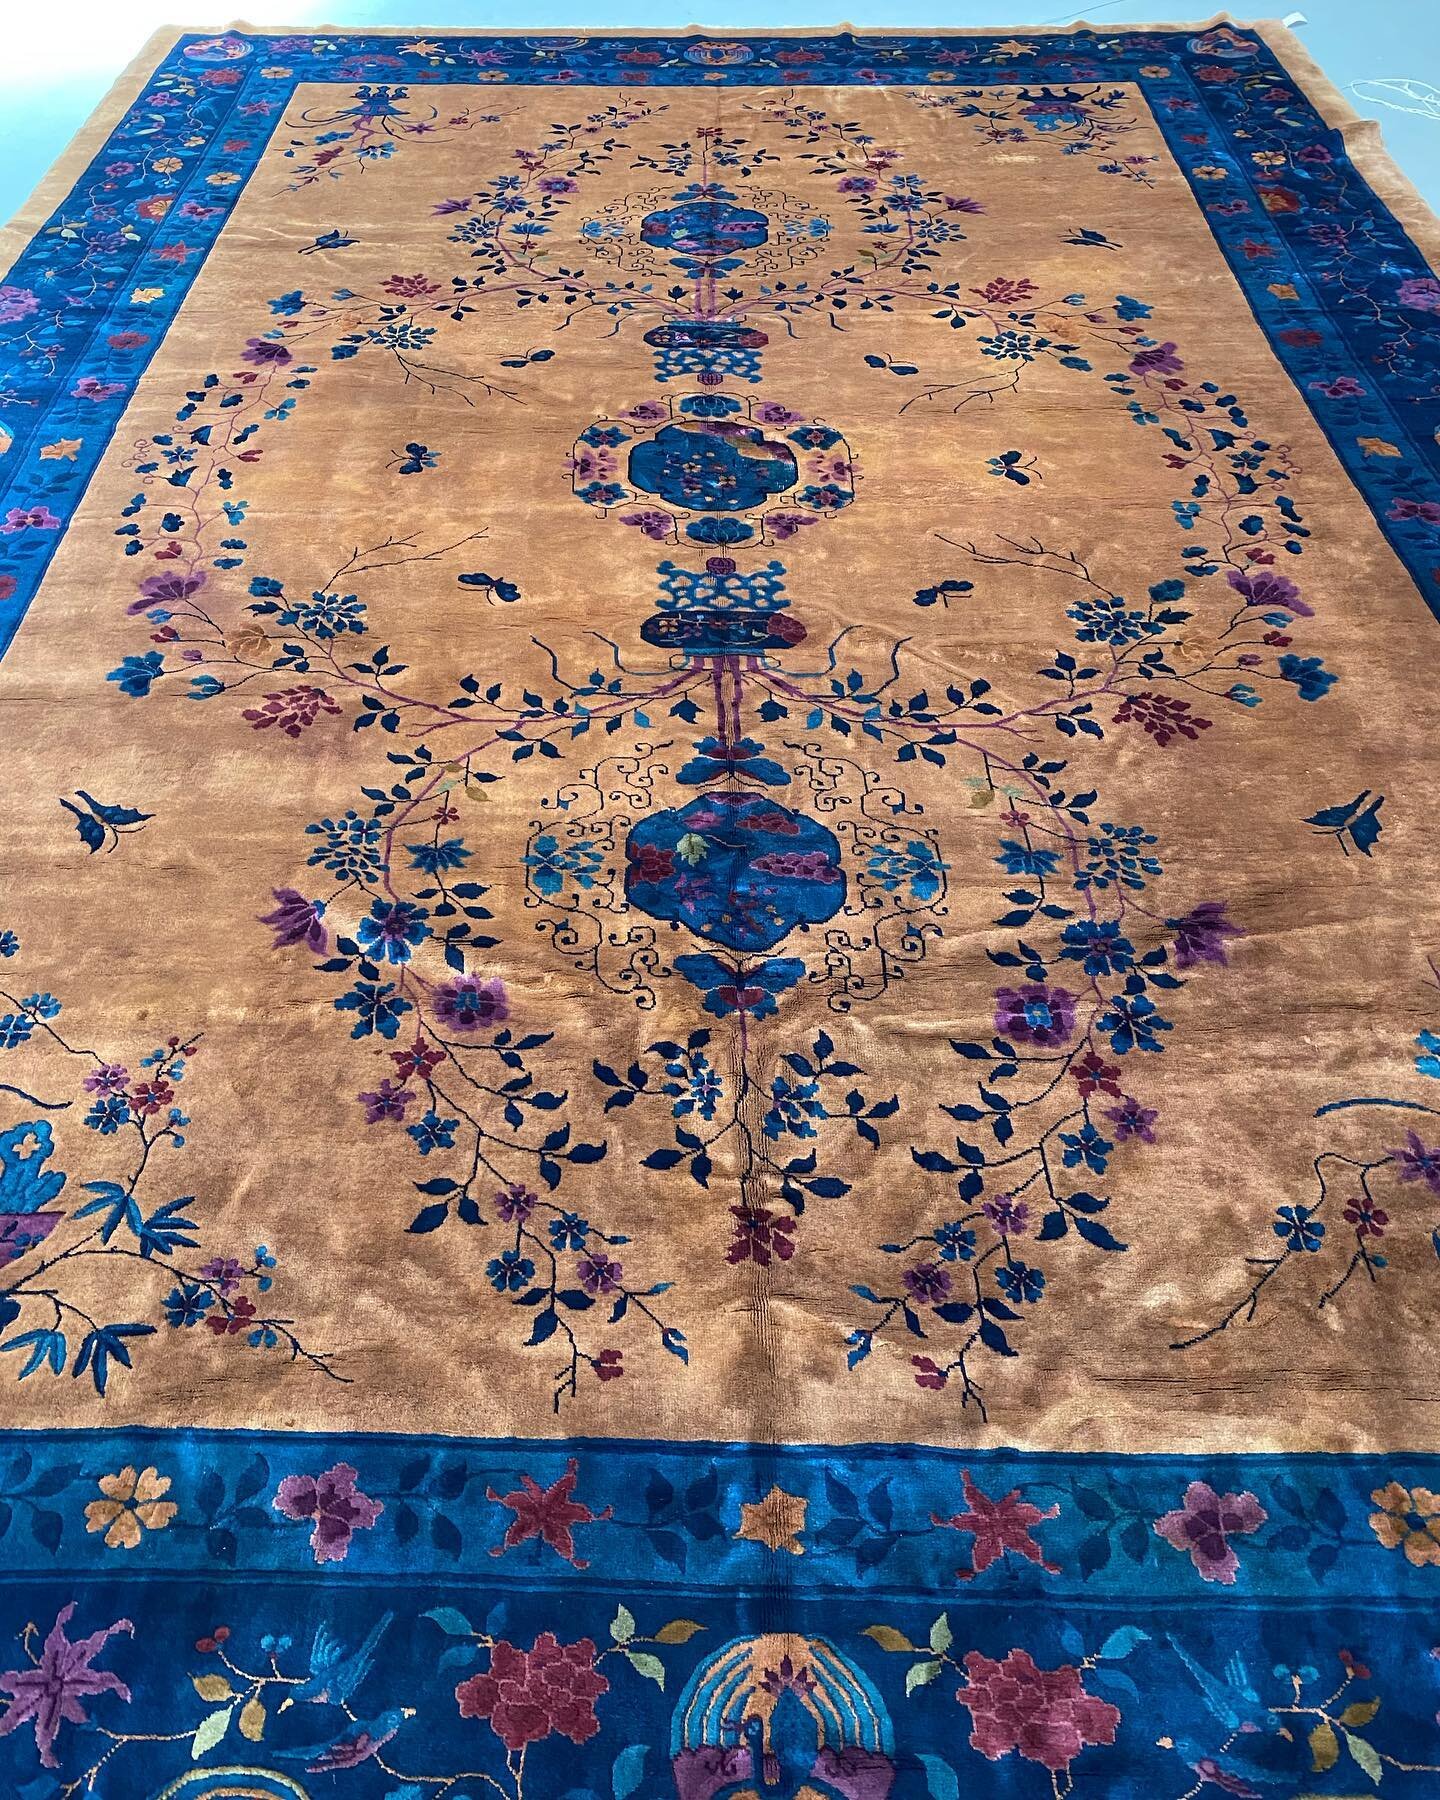 Chinese mandarin rug size is 12x18